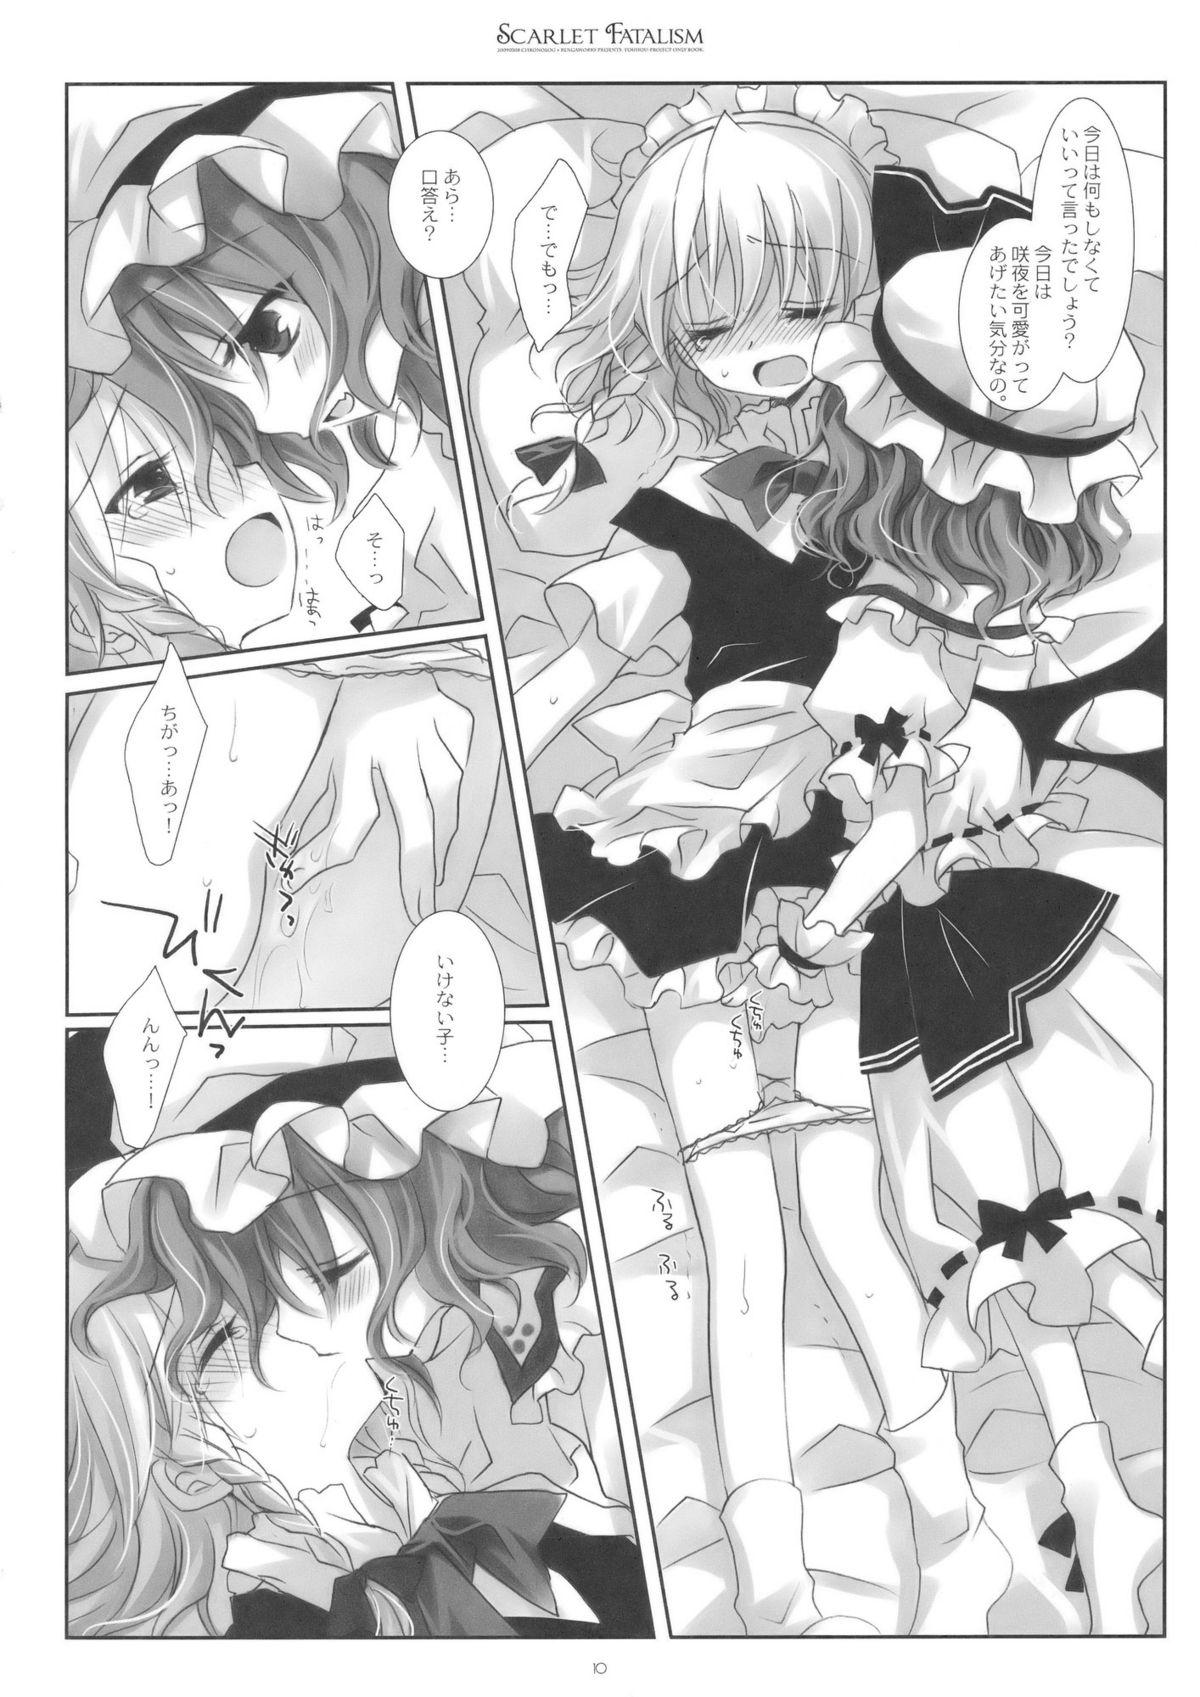 Sex Toys Scarlet Fatalism - Touhou project Nalgona - Page 10